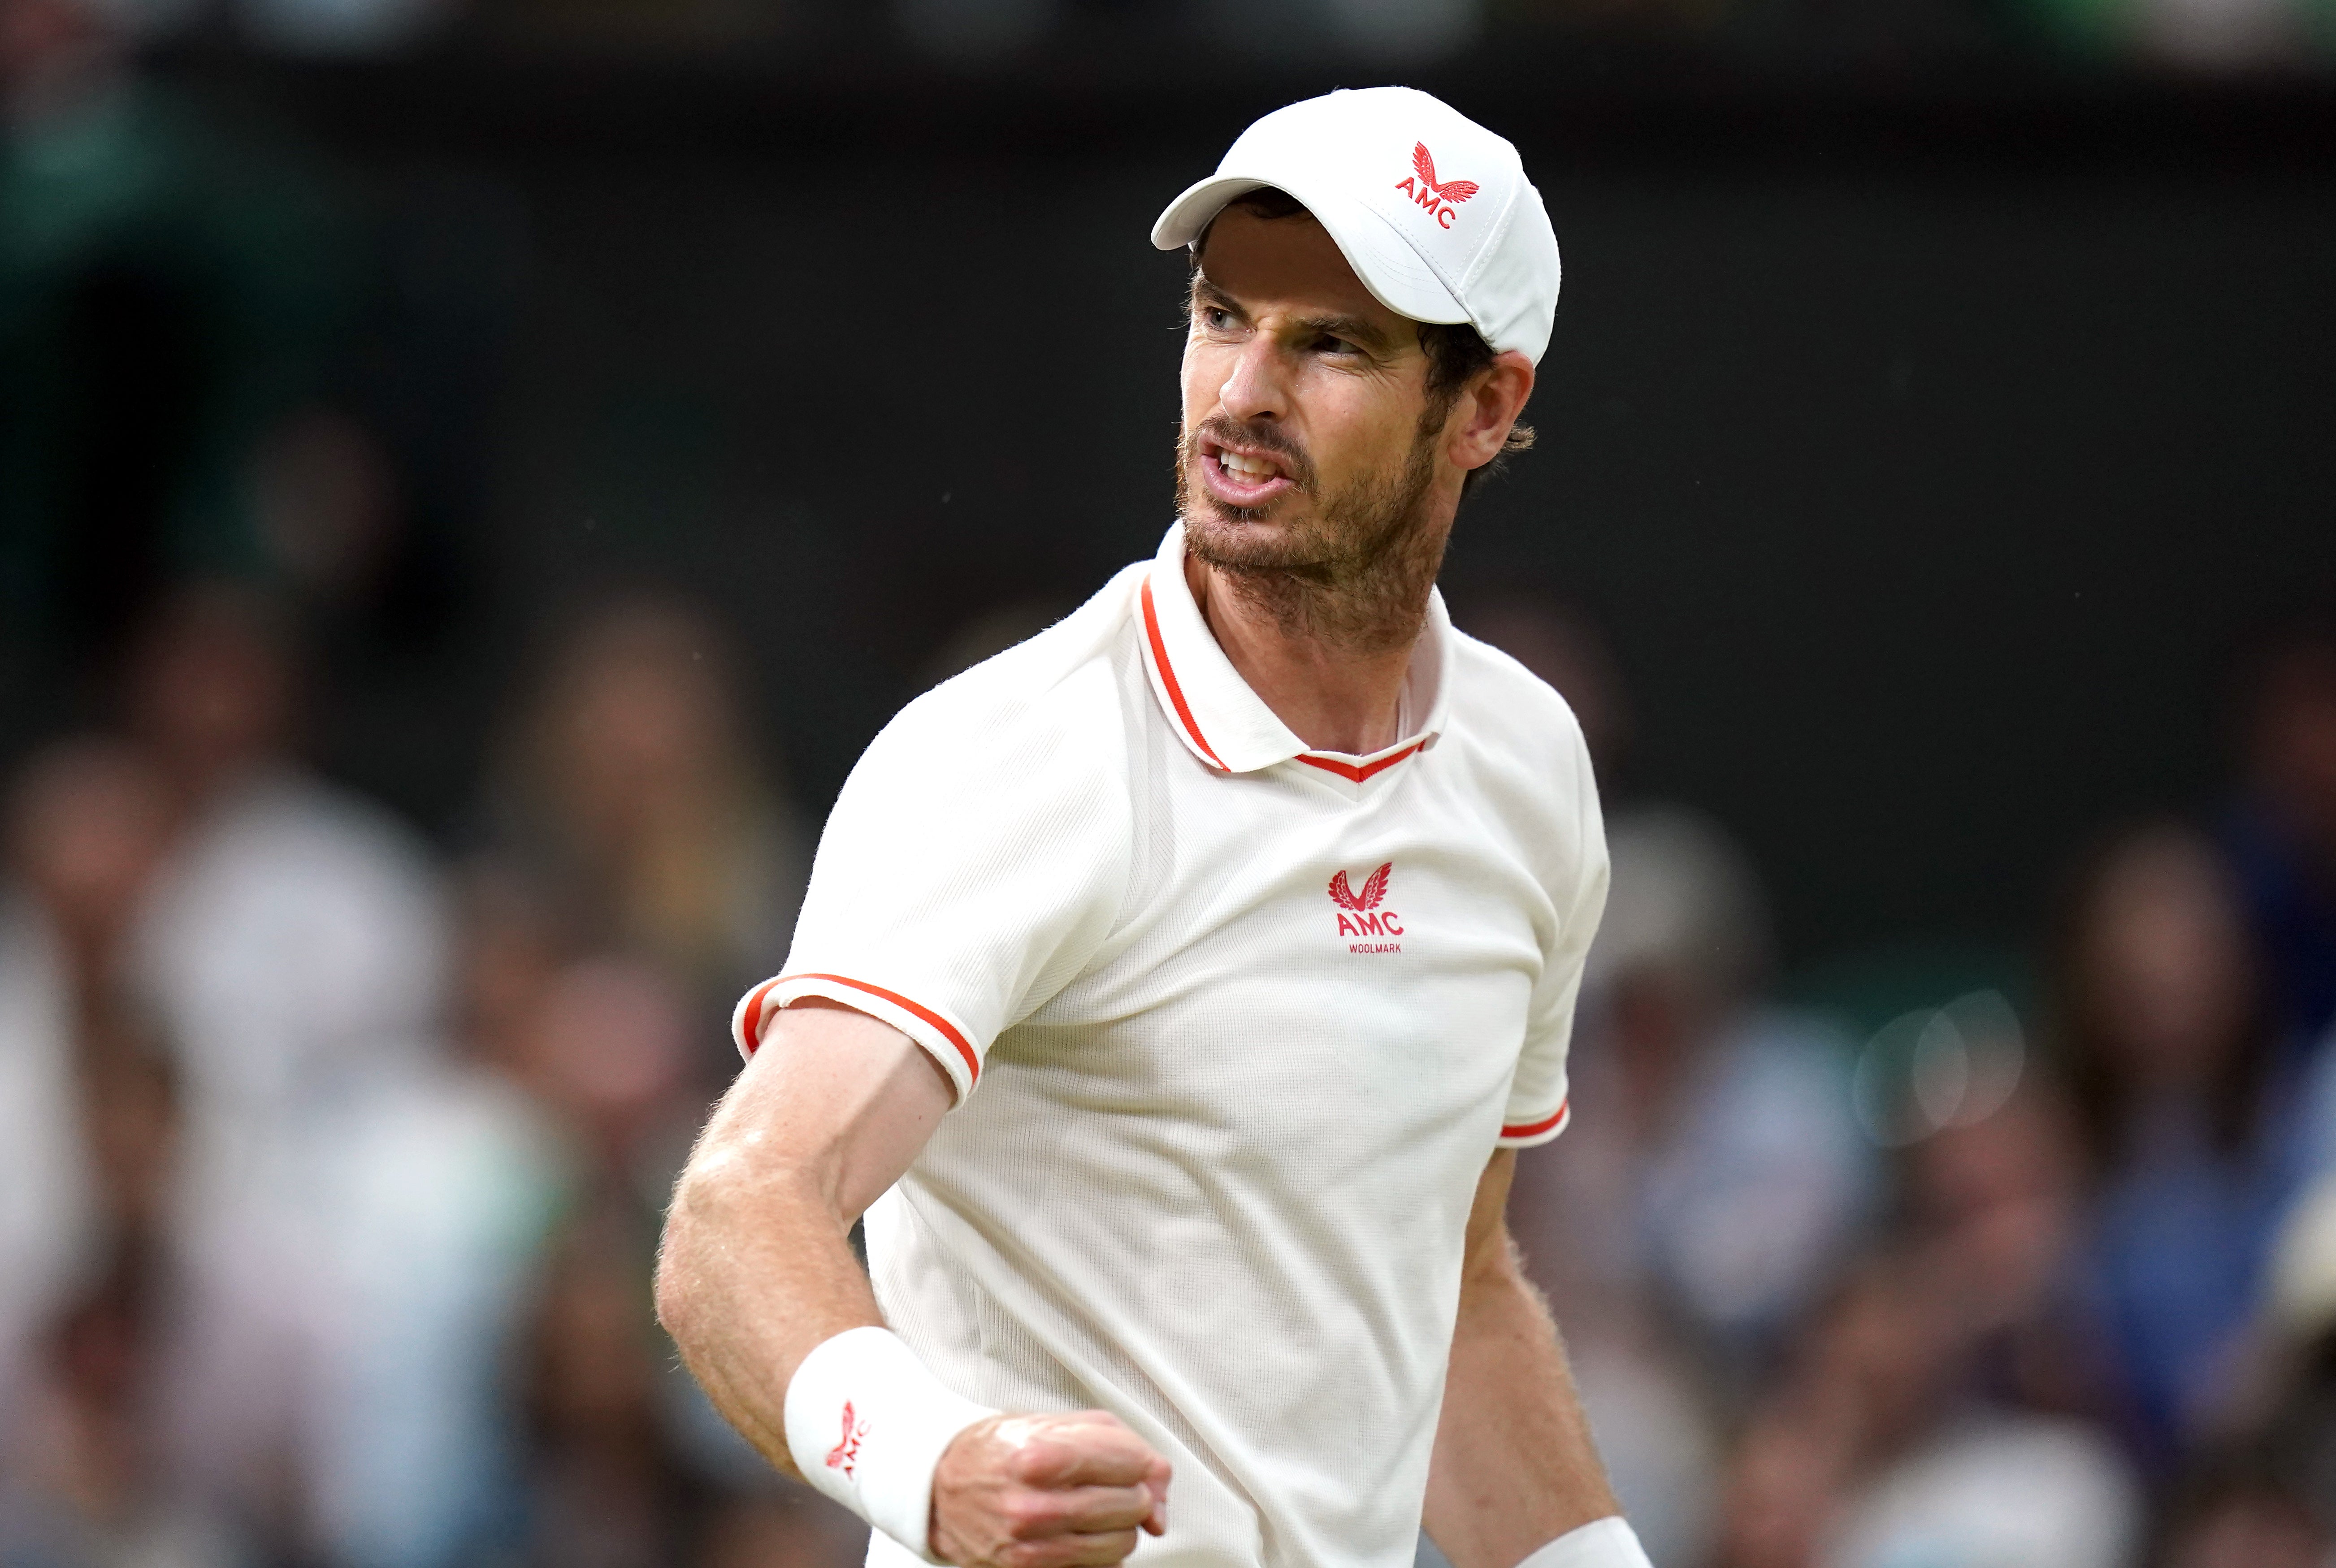 Andy Murray to face Jurij Rodionov at Surbiton as Wimbledon preparations step up The Independent